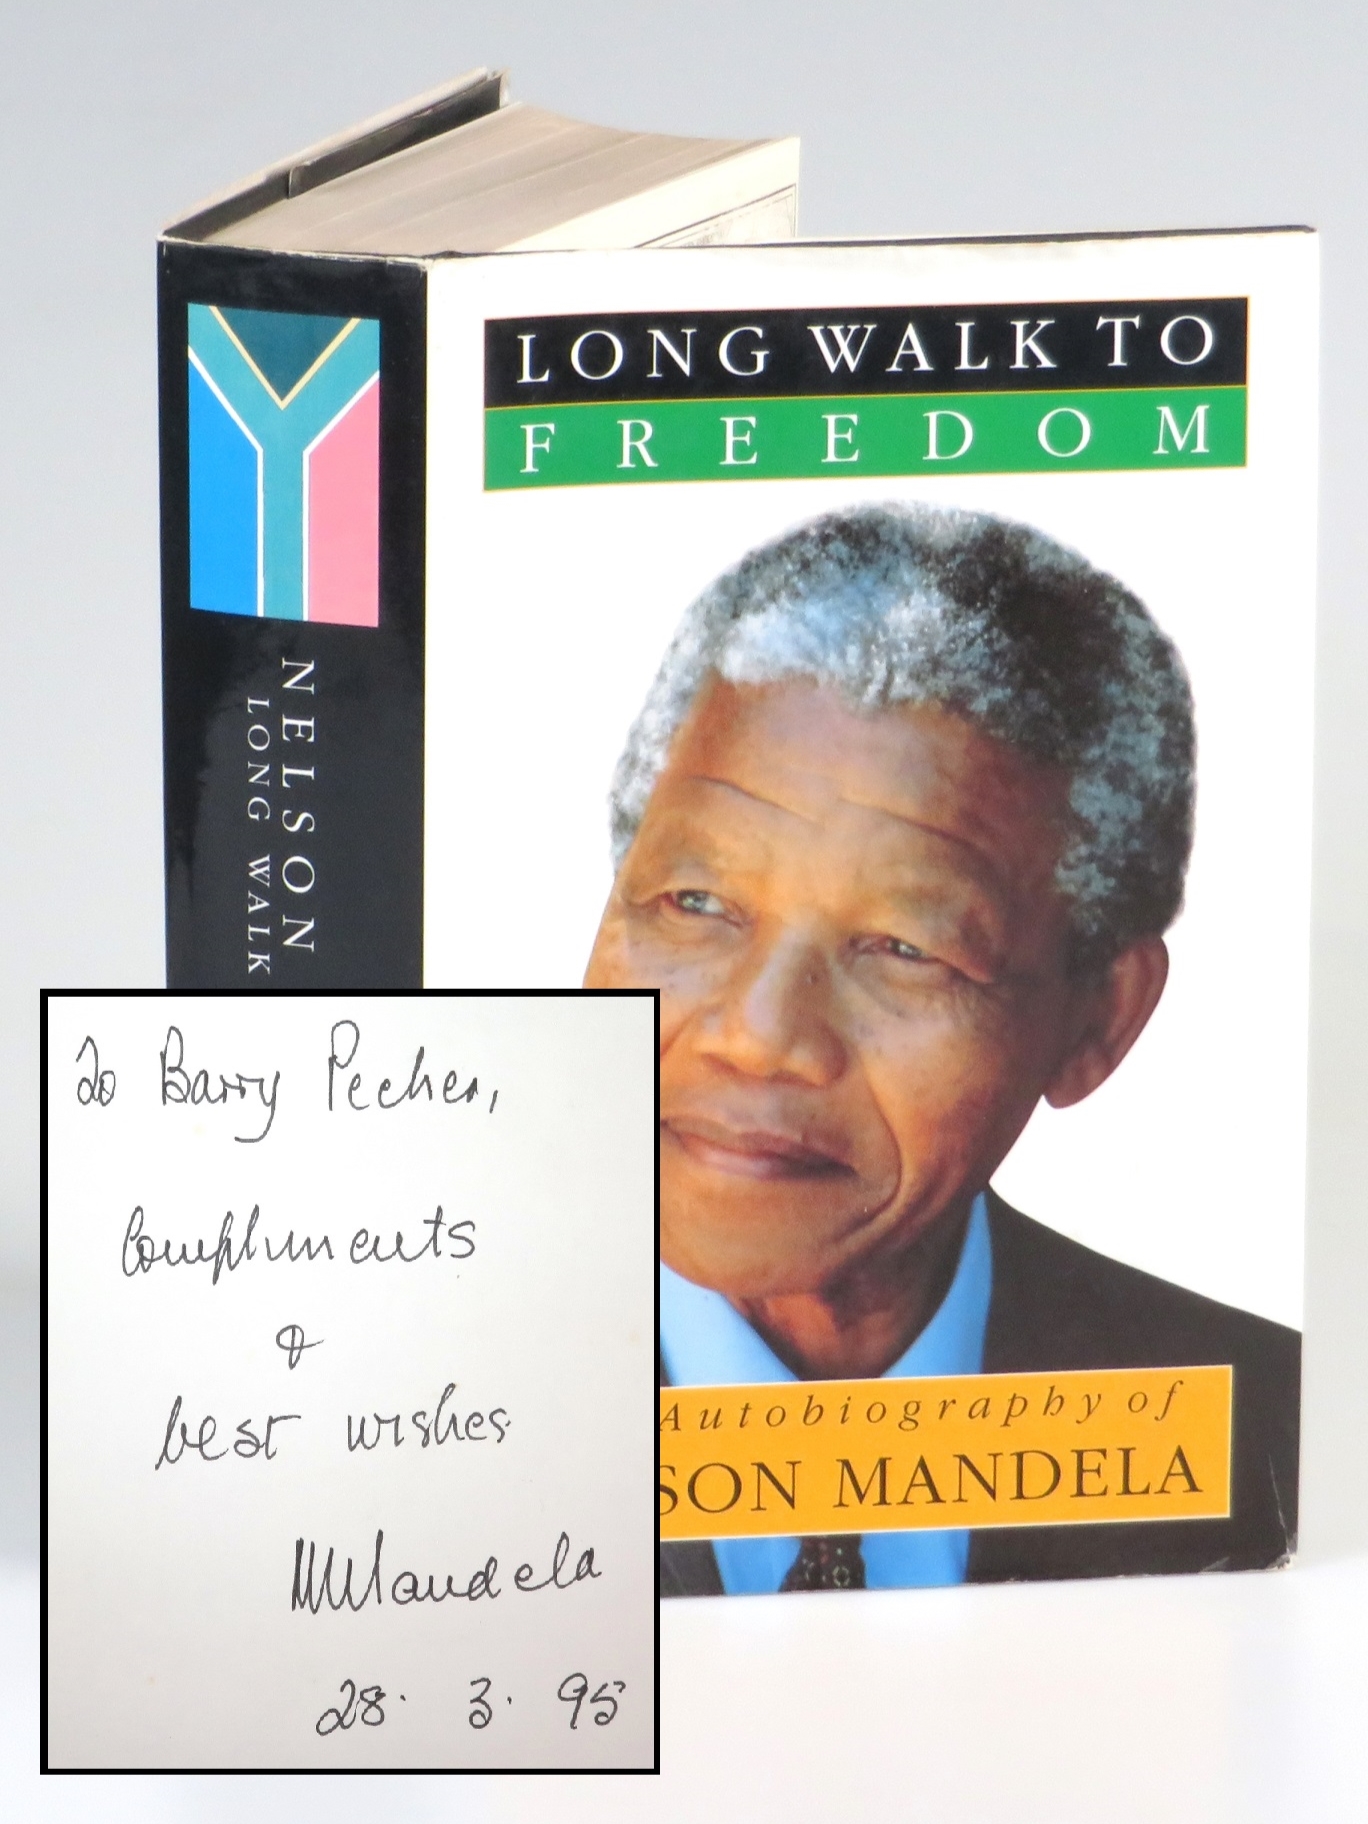 Long Walk to Freedom, the South African